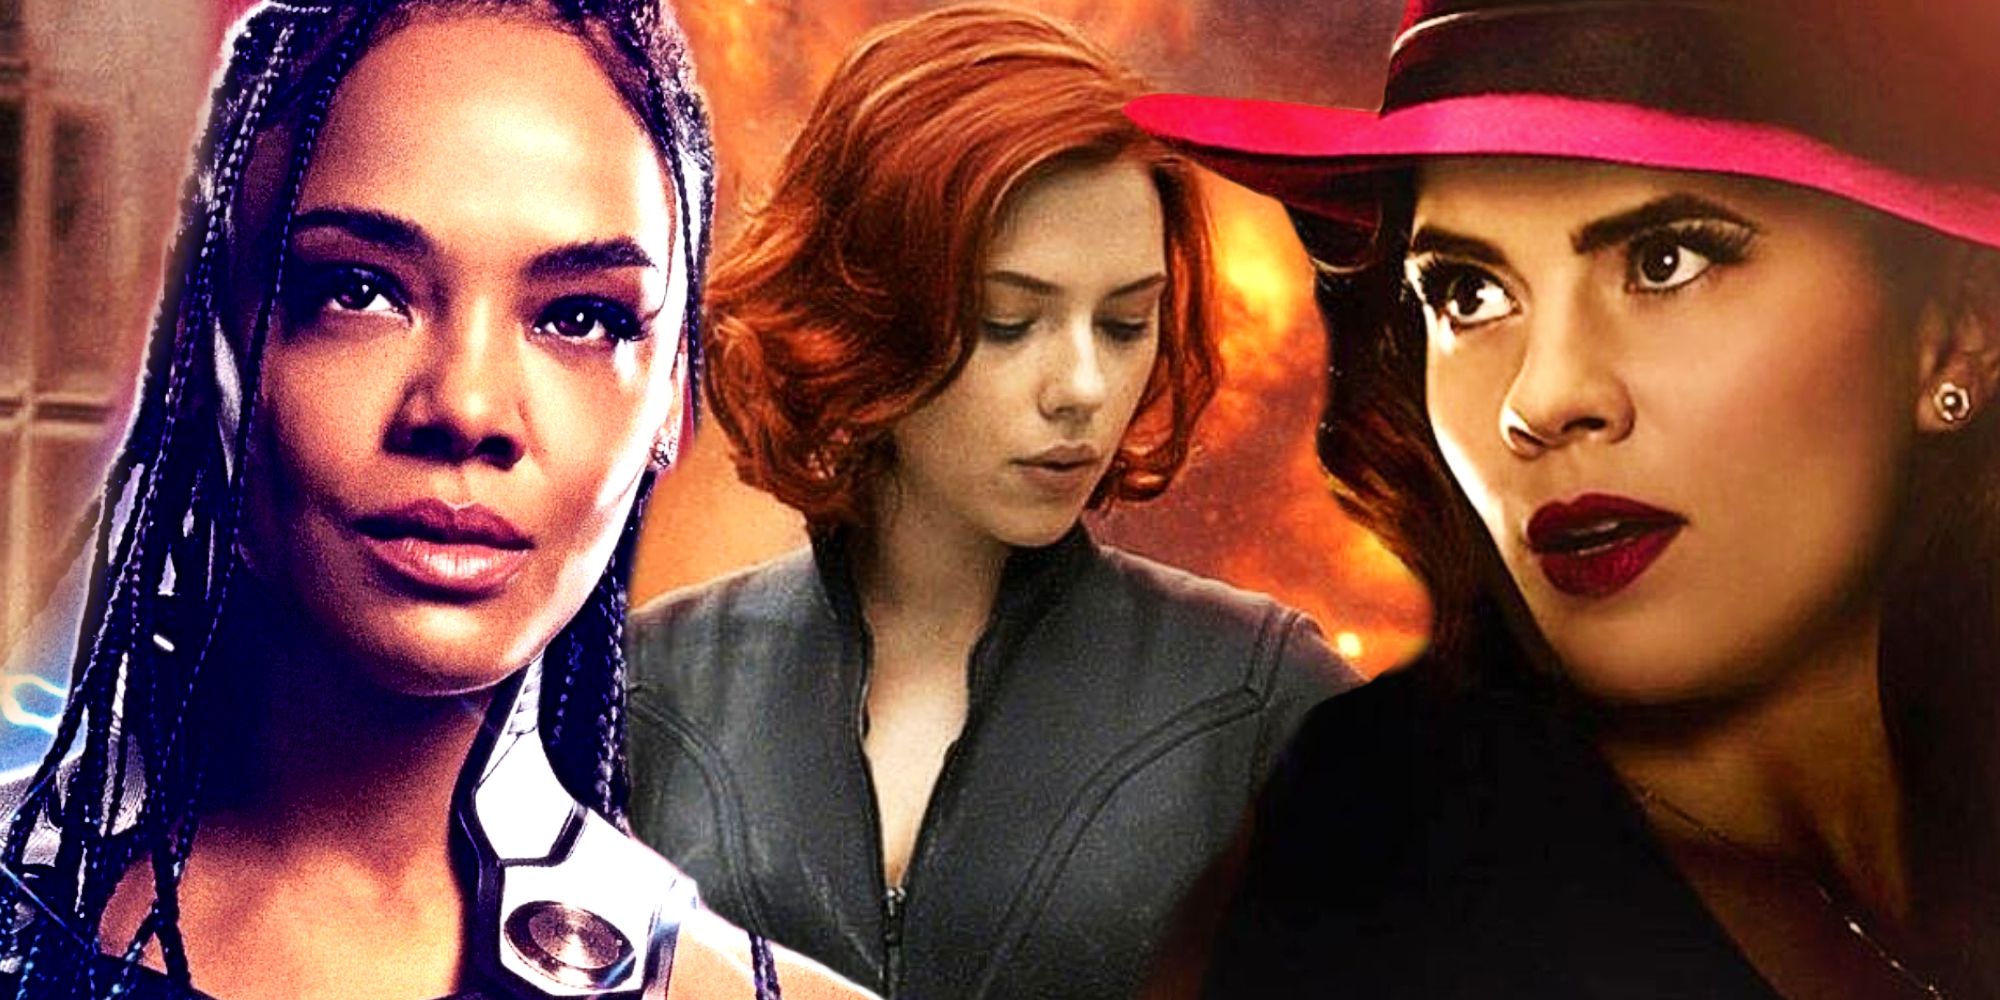 Valkyrie, Black Widow, and Peggy Carter in the MCU